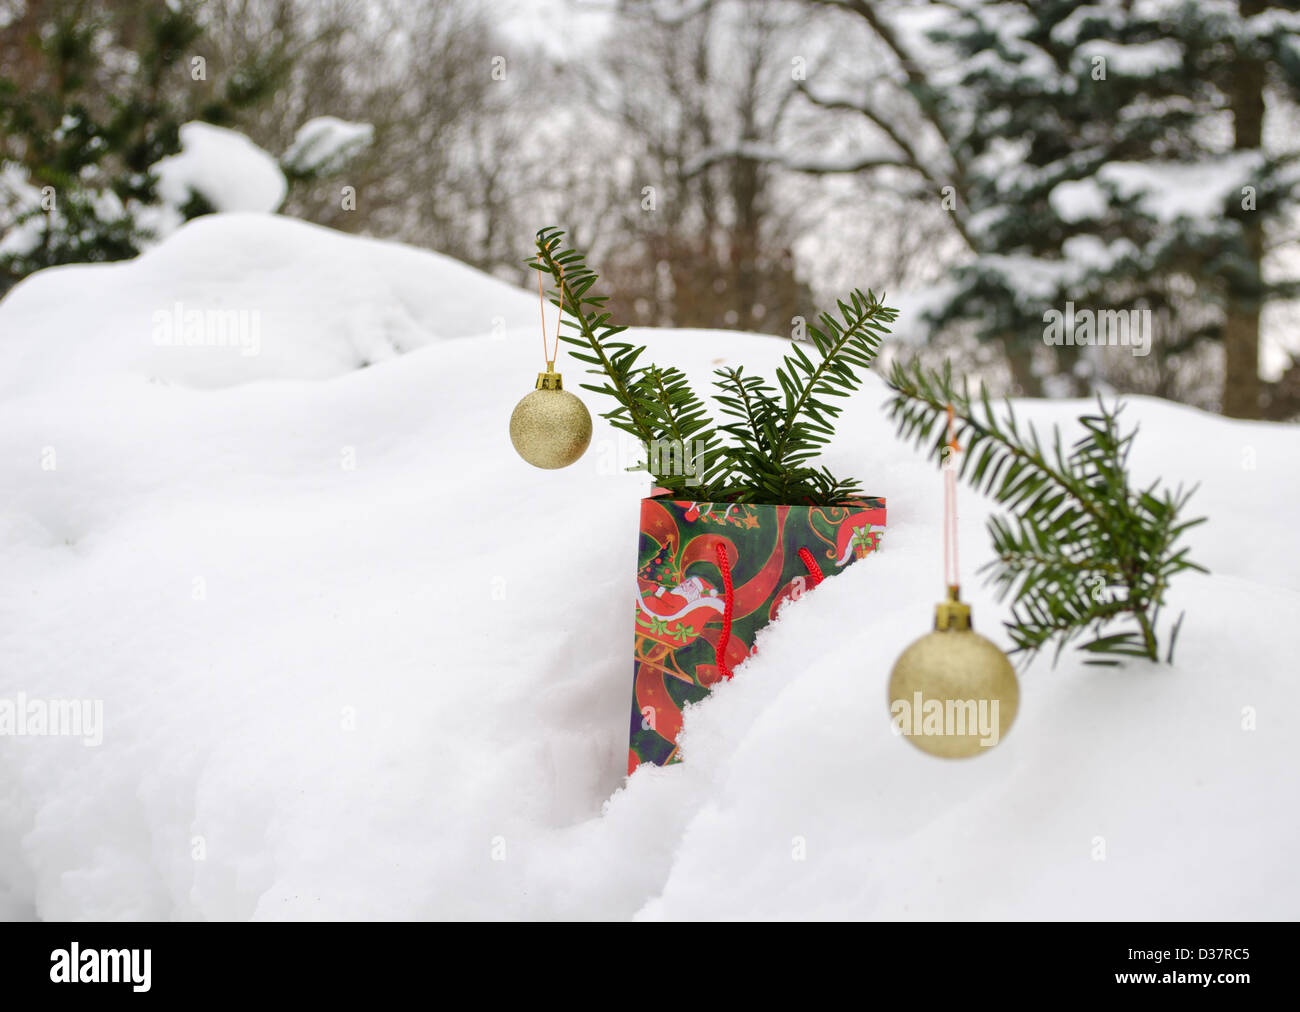 golden glossy round christmas tree toys hang on yew plant branch covered in winter snow. present gift bag. Stock Photo